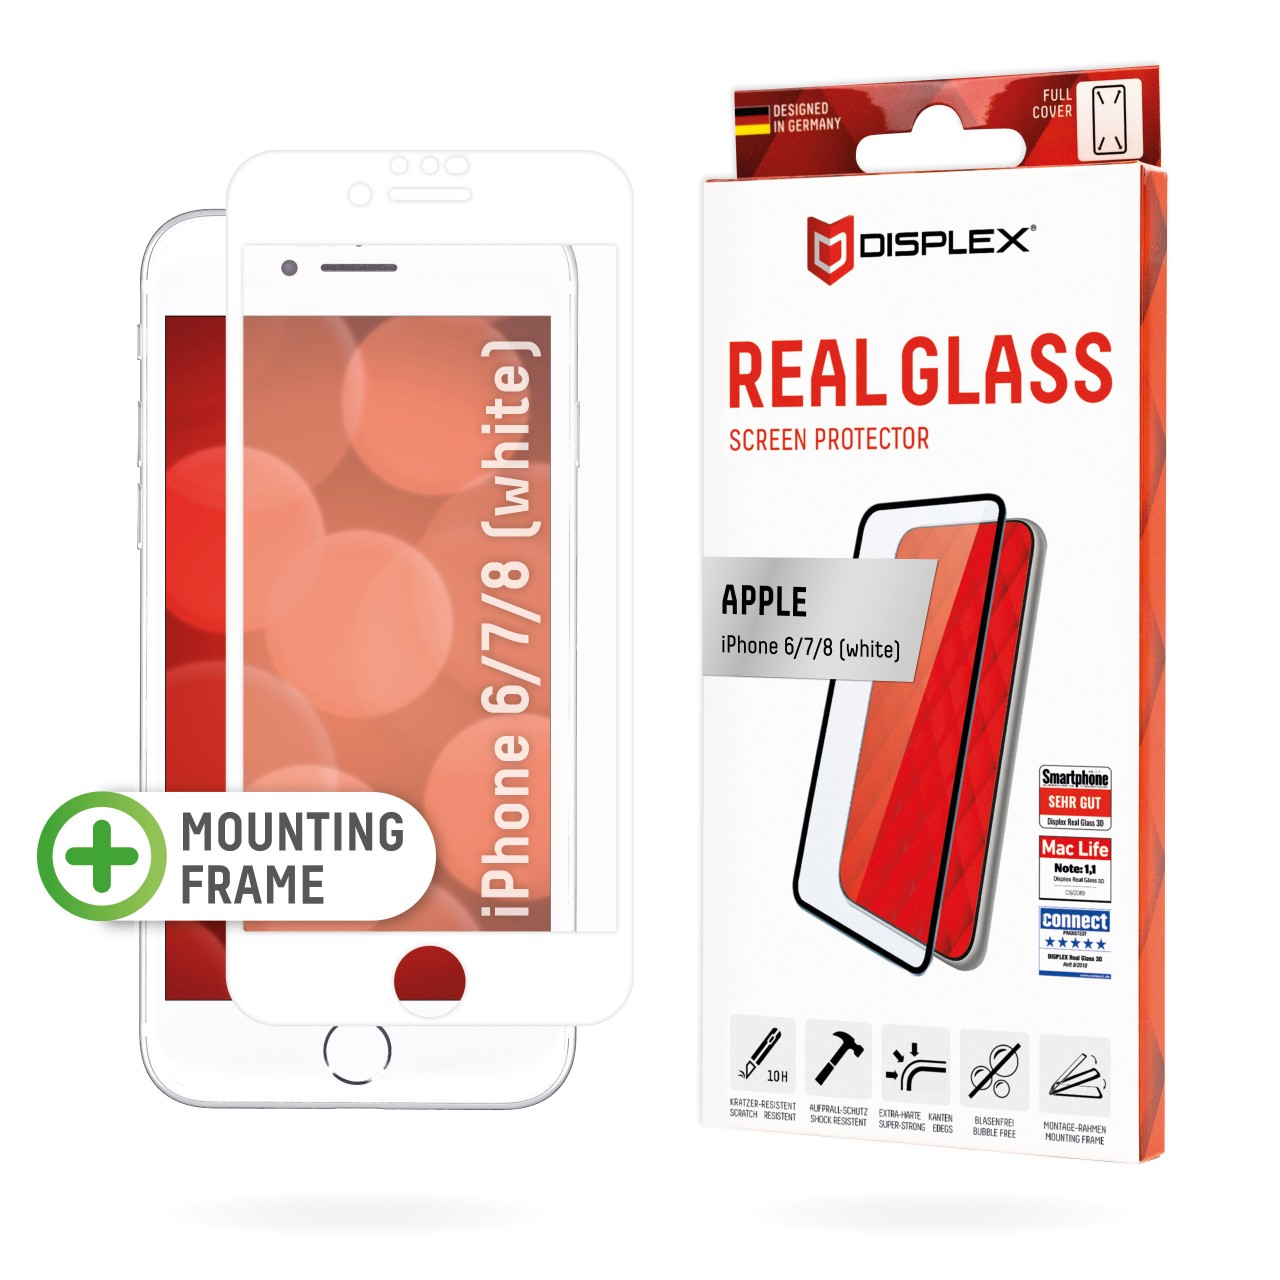 iPhone 6/7/8 (White) Full Cover Glass